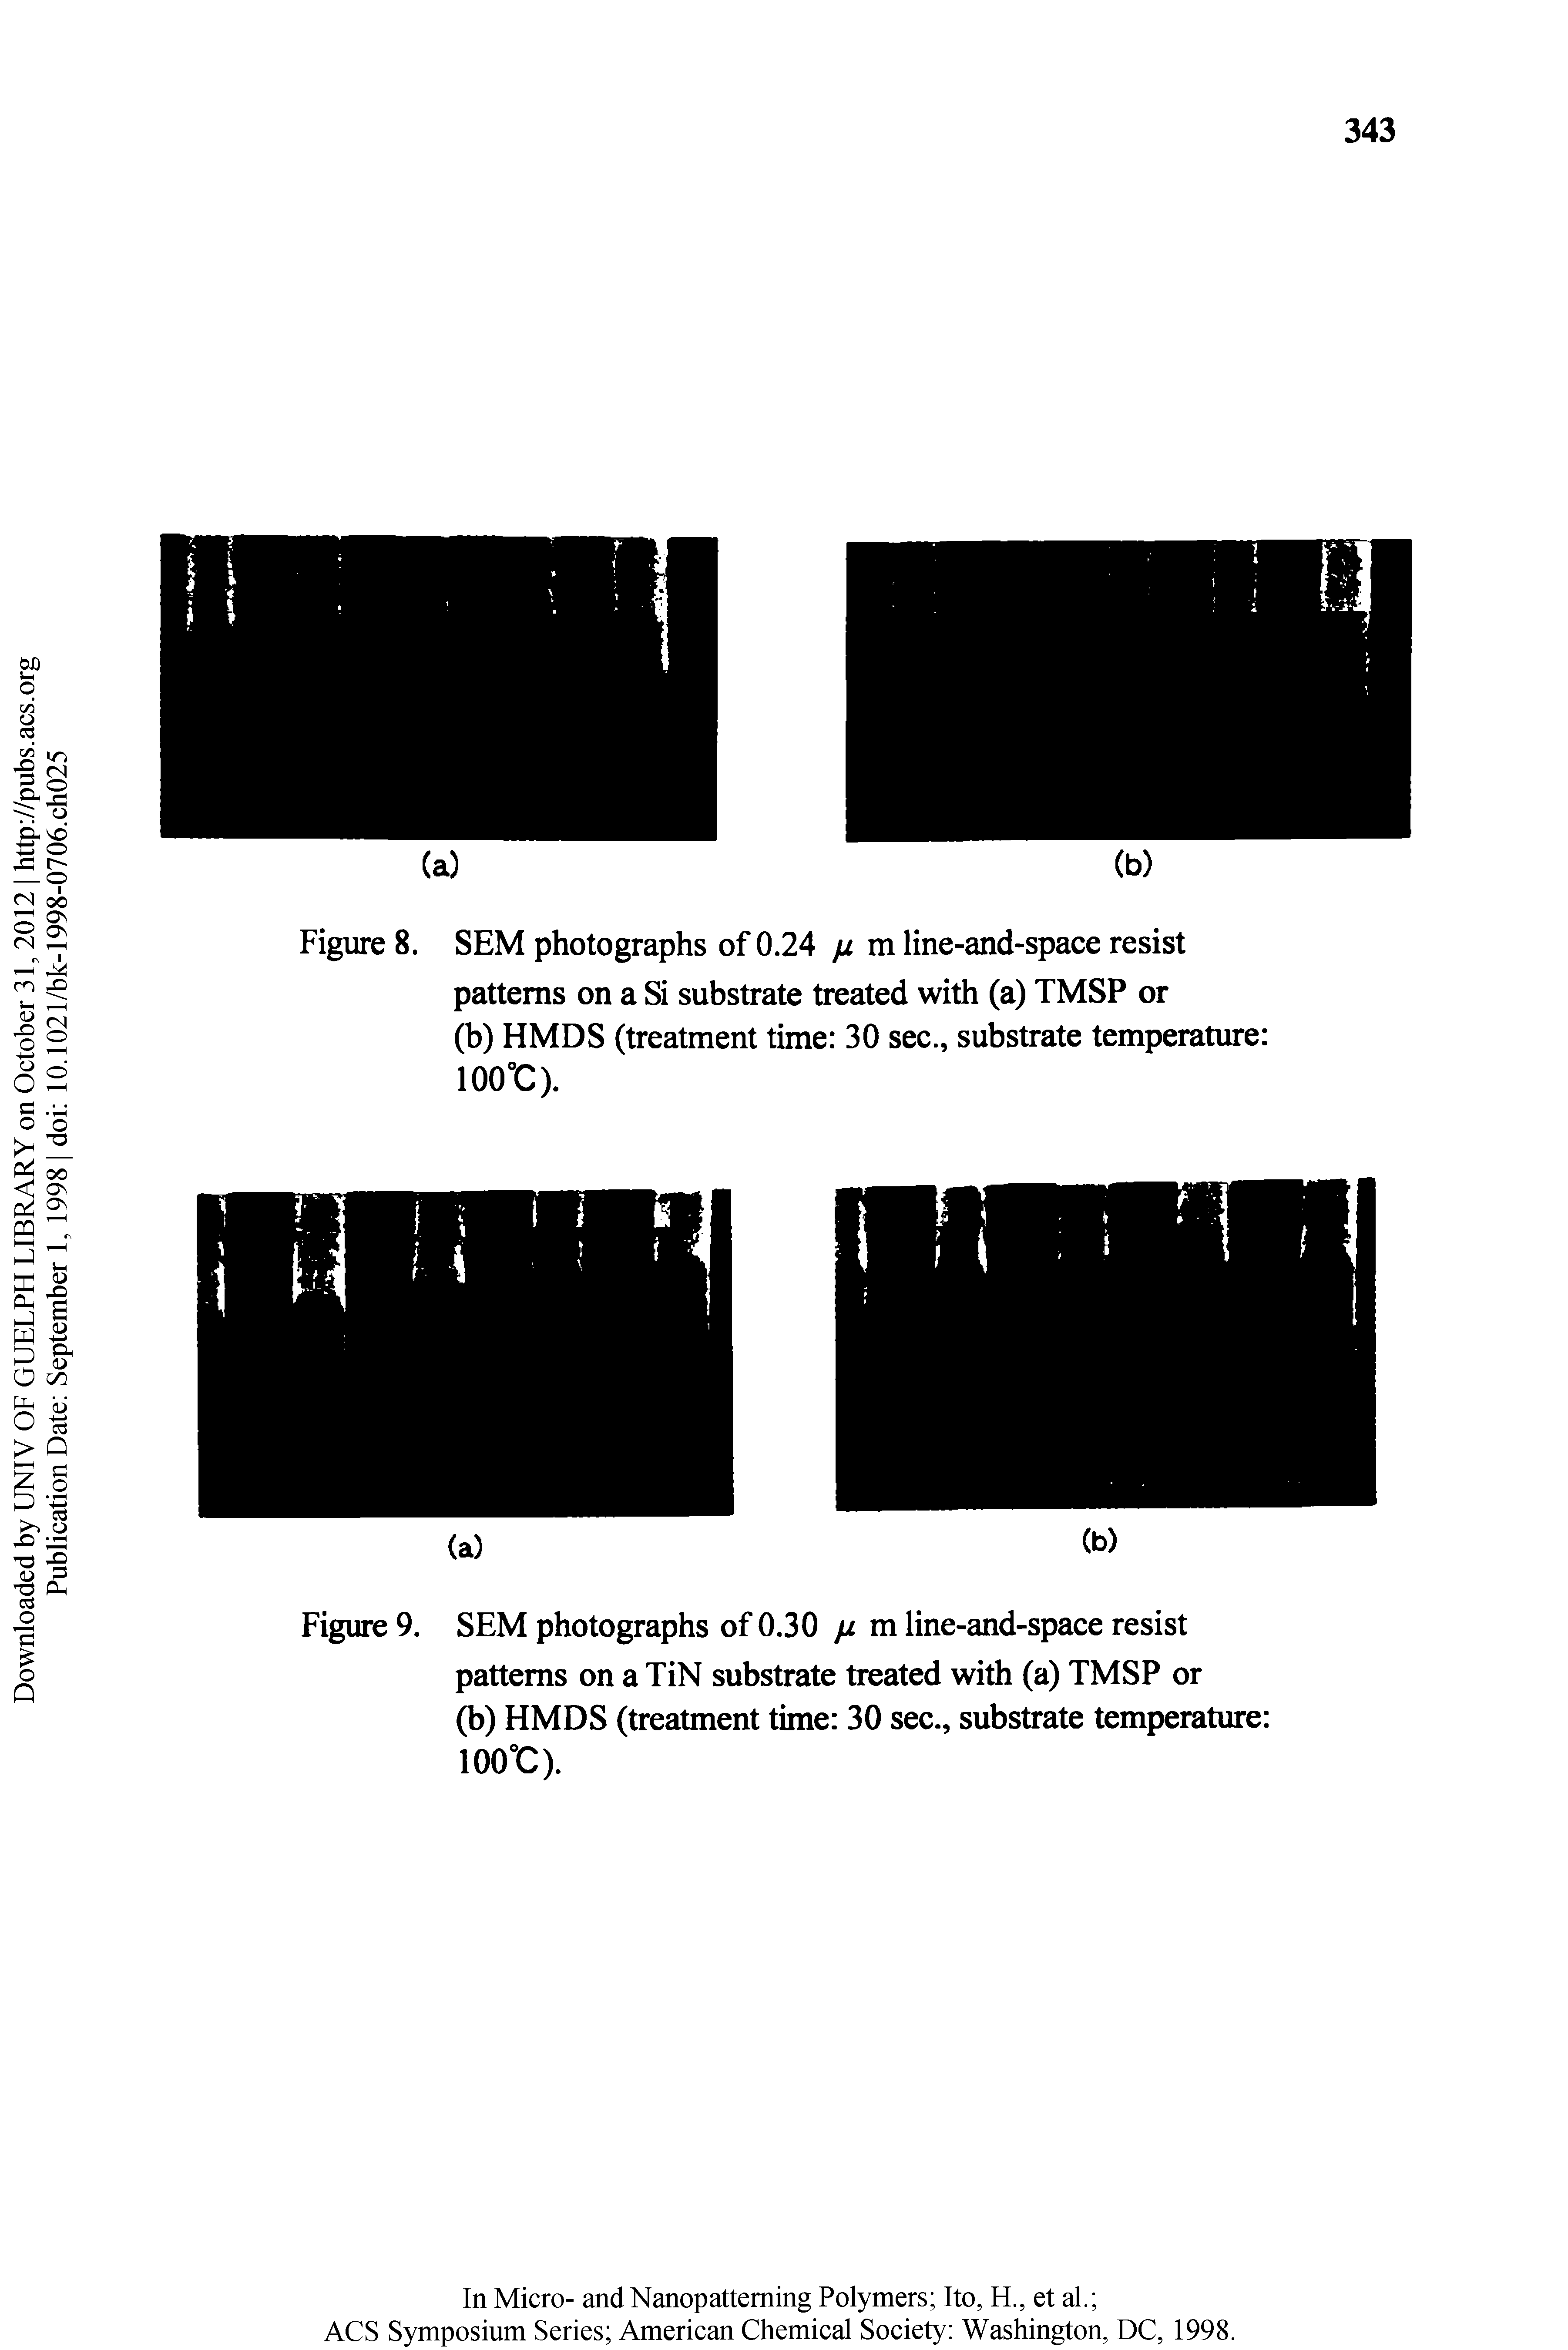 Figure 8. SEM photographs of 0.24 fjL m line-and-space resist patterns on a Si substrate treated with (a) TMSP or (b) HMDS (treatment time 30 sec., substrate temperature 100 C).